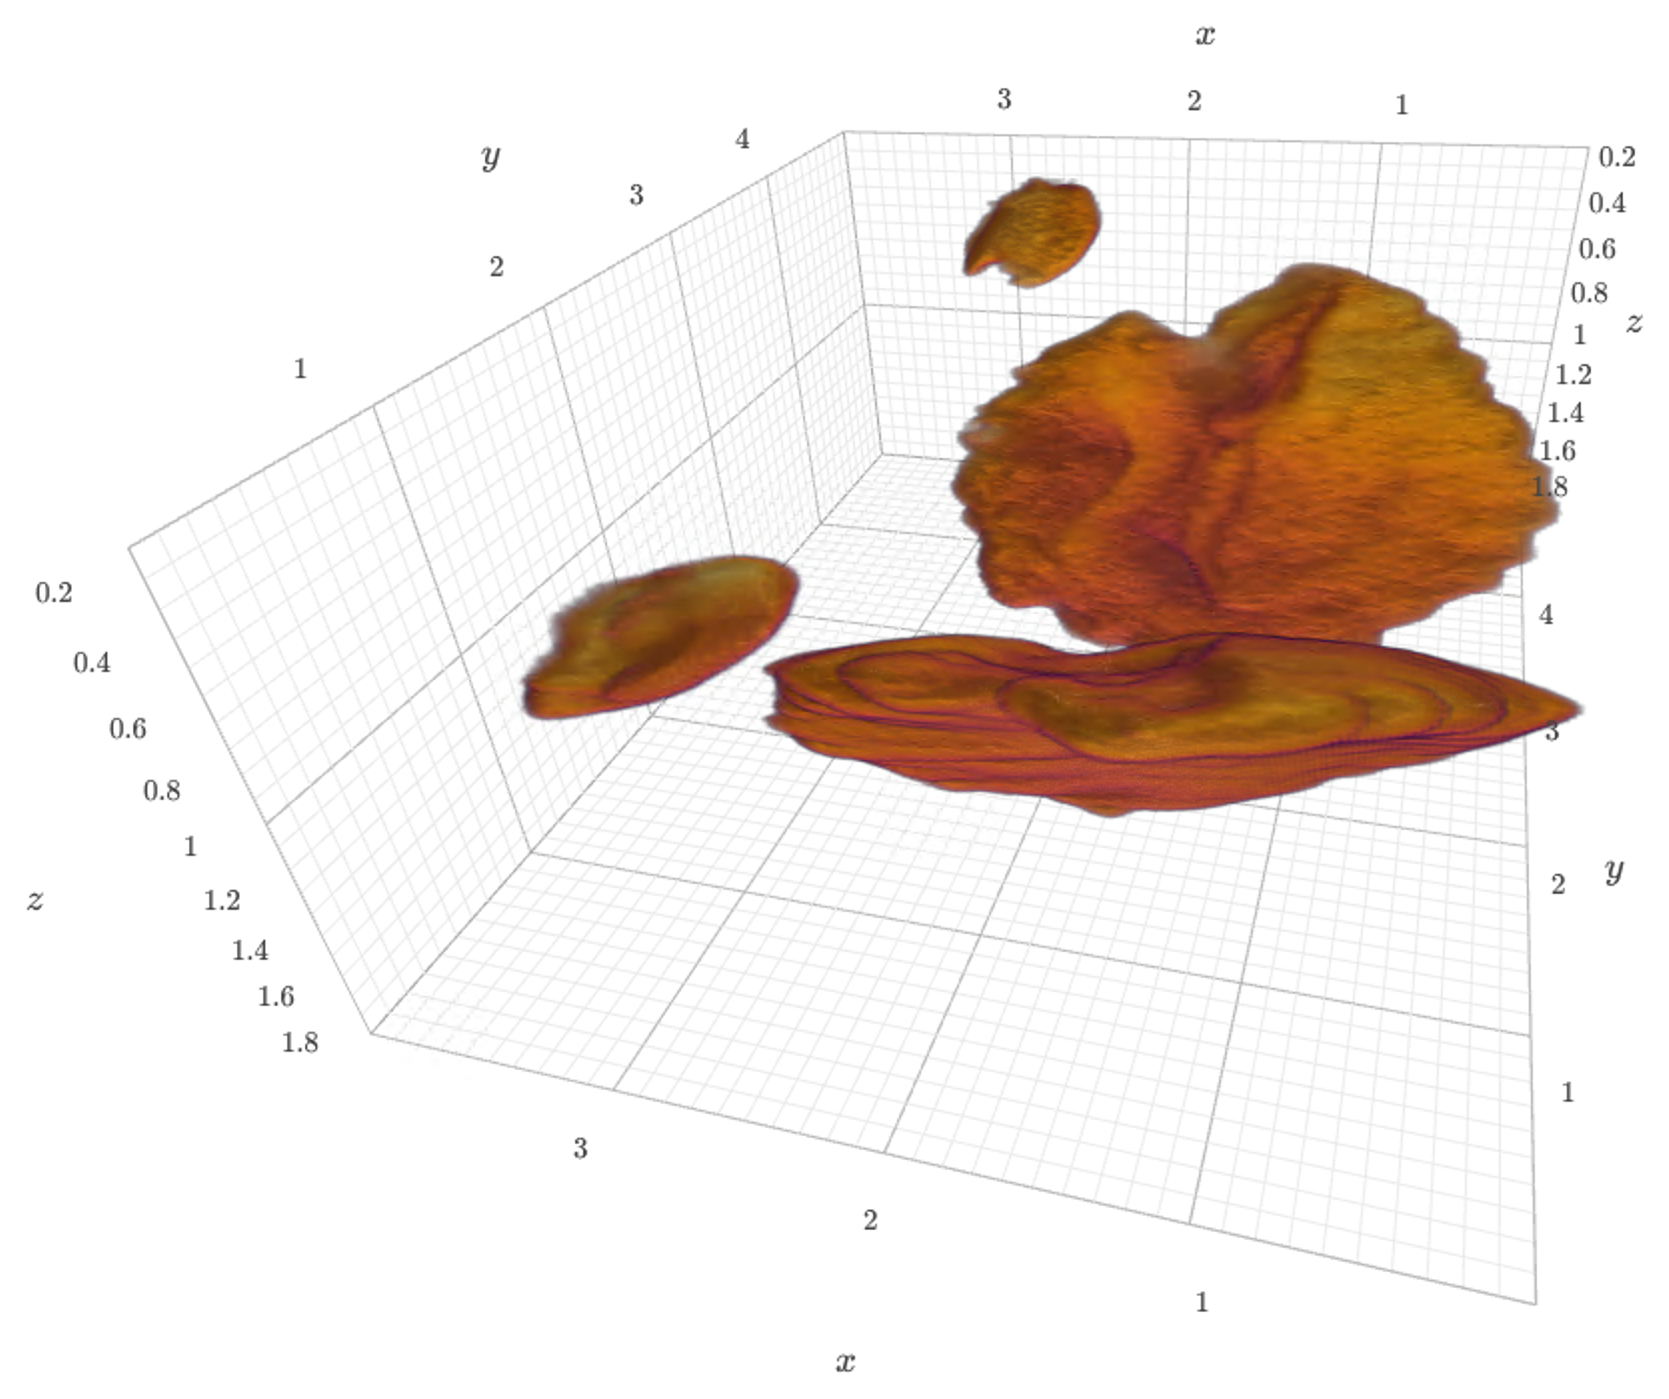 Figure 3: Three-dimensional view of extracted otoliths of specimen 104016. The specimen was scanned with an isotropic voxel size of 13 μm. The extracted otolith has a size of approximately 250 x 350 x 150 pixels. The axes labels correspond to mm. A dynamic view of the visualization is available in the Supplementary Materials.